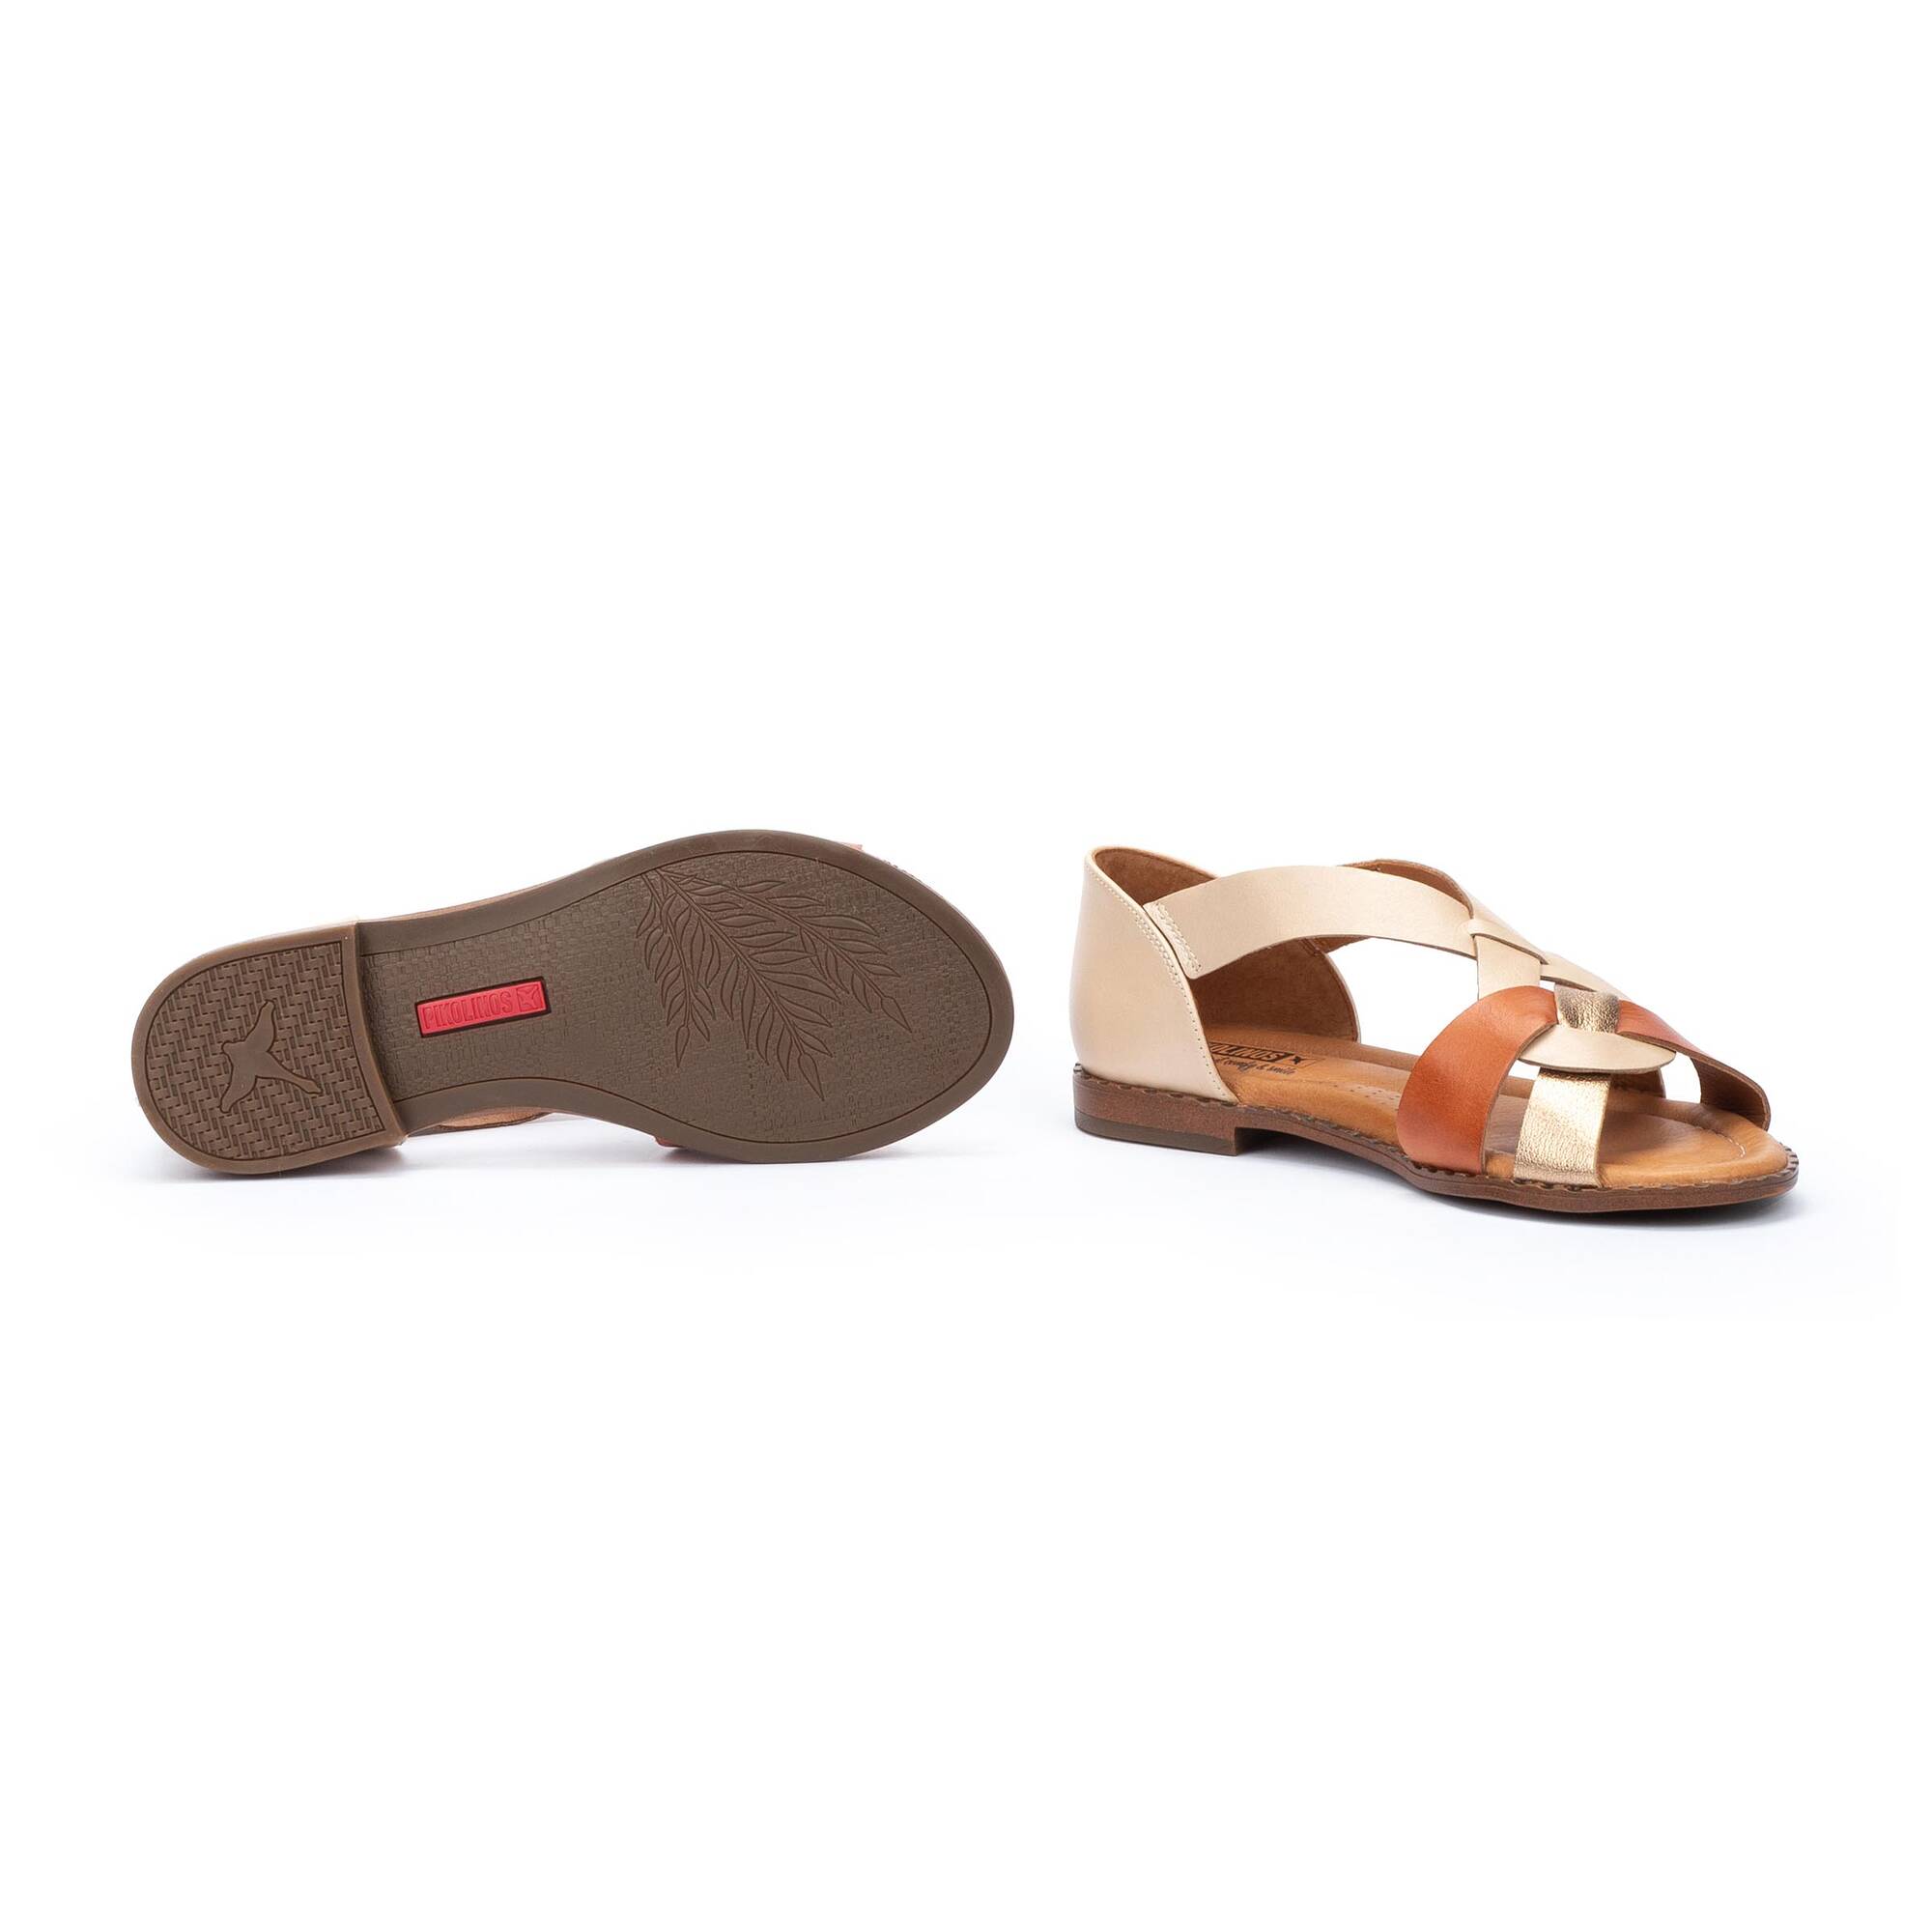 Sandals | ALGAR W0X-0812CPC1, MARFIL, large image number 70 | null